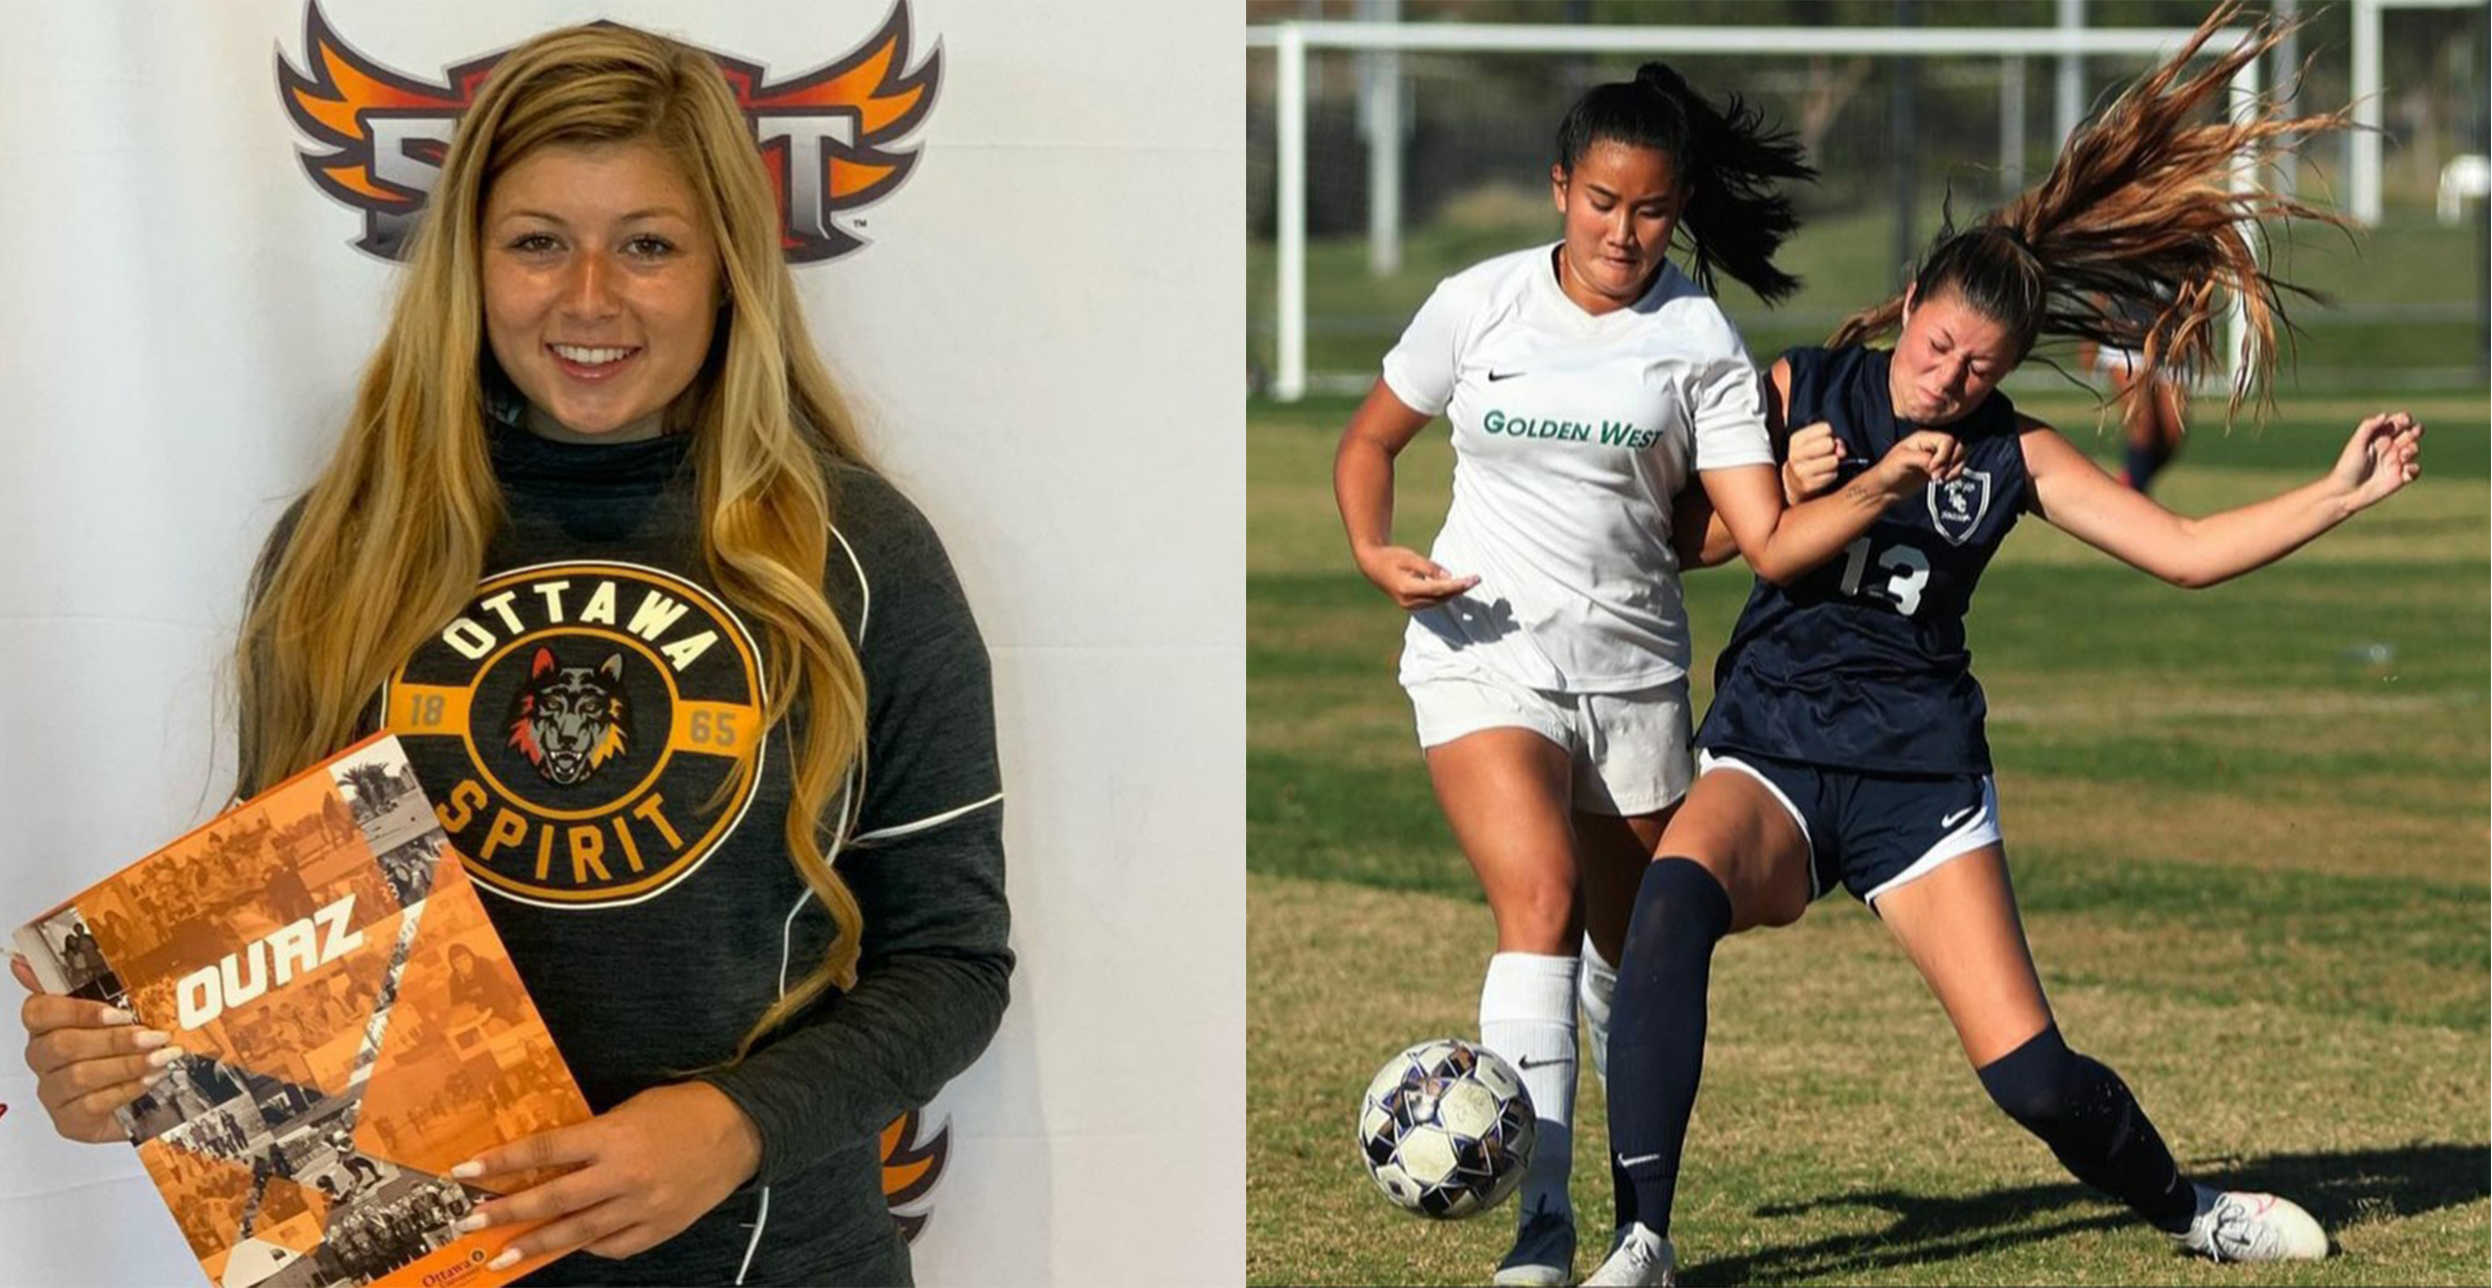 Women's soccer player Kailey Earl signs with Ottawa University